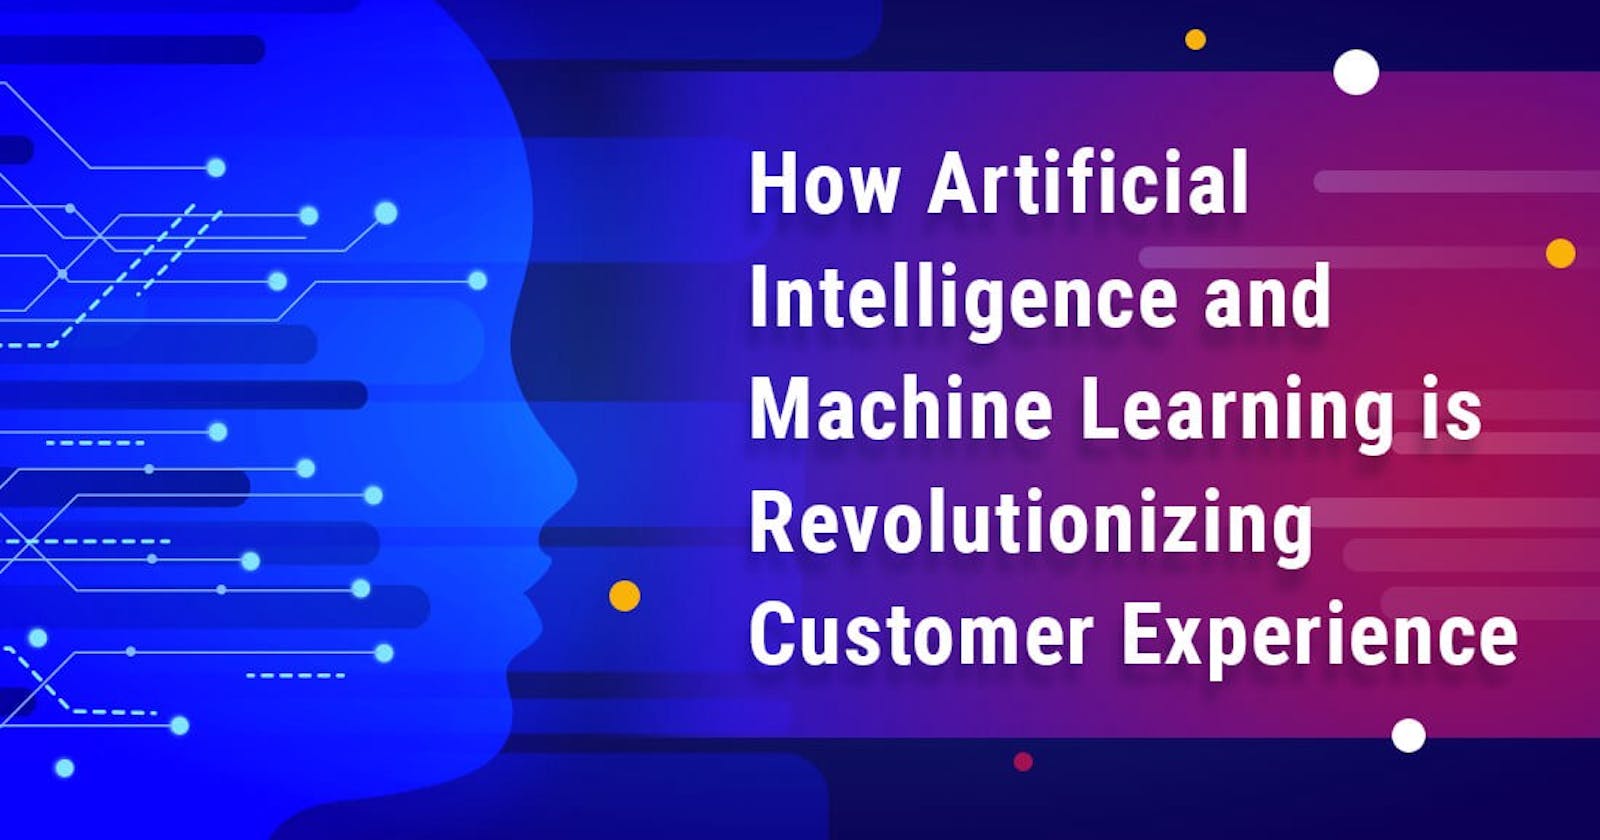 How Artificial Intelligence and Machine Learning is Revolutionizing Customer Experience